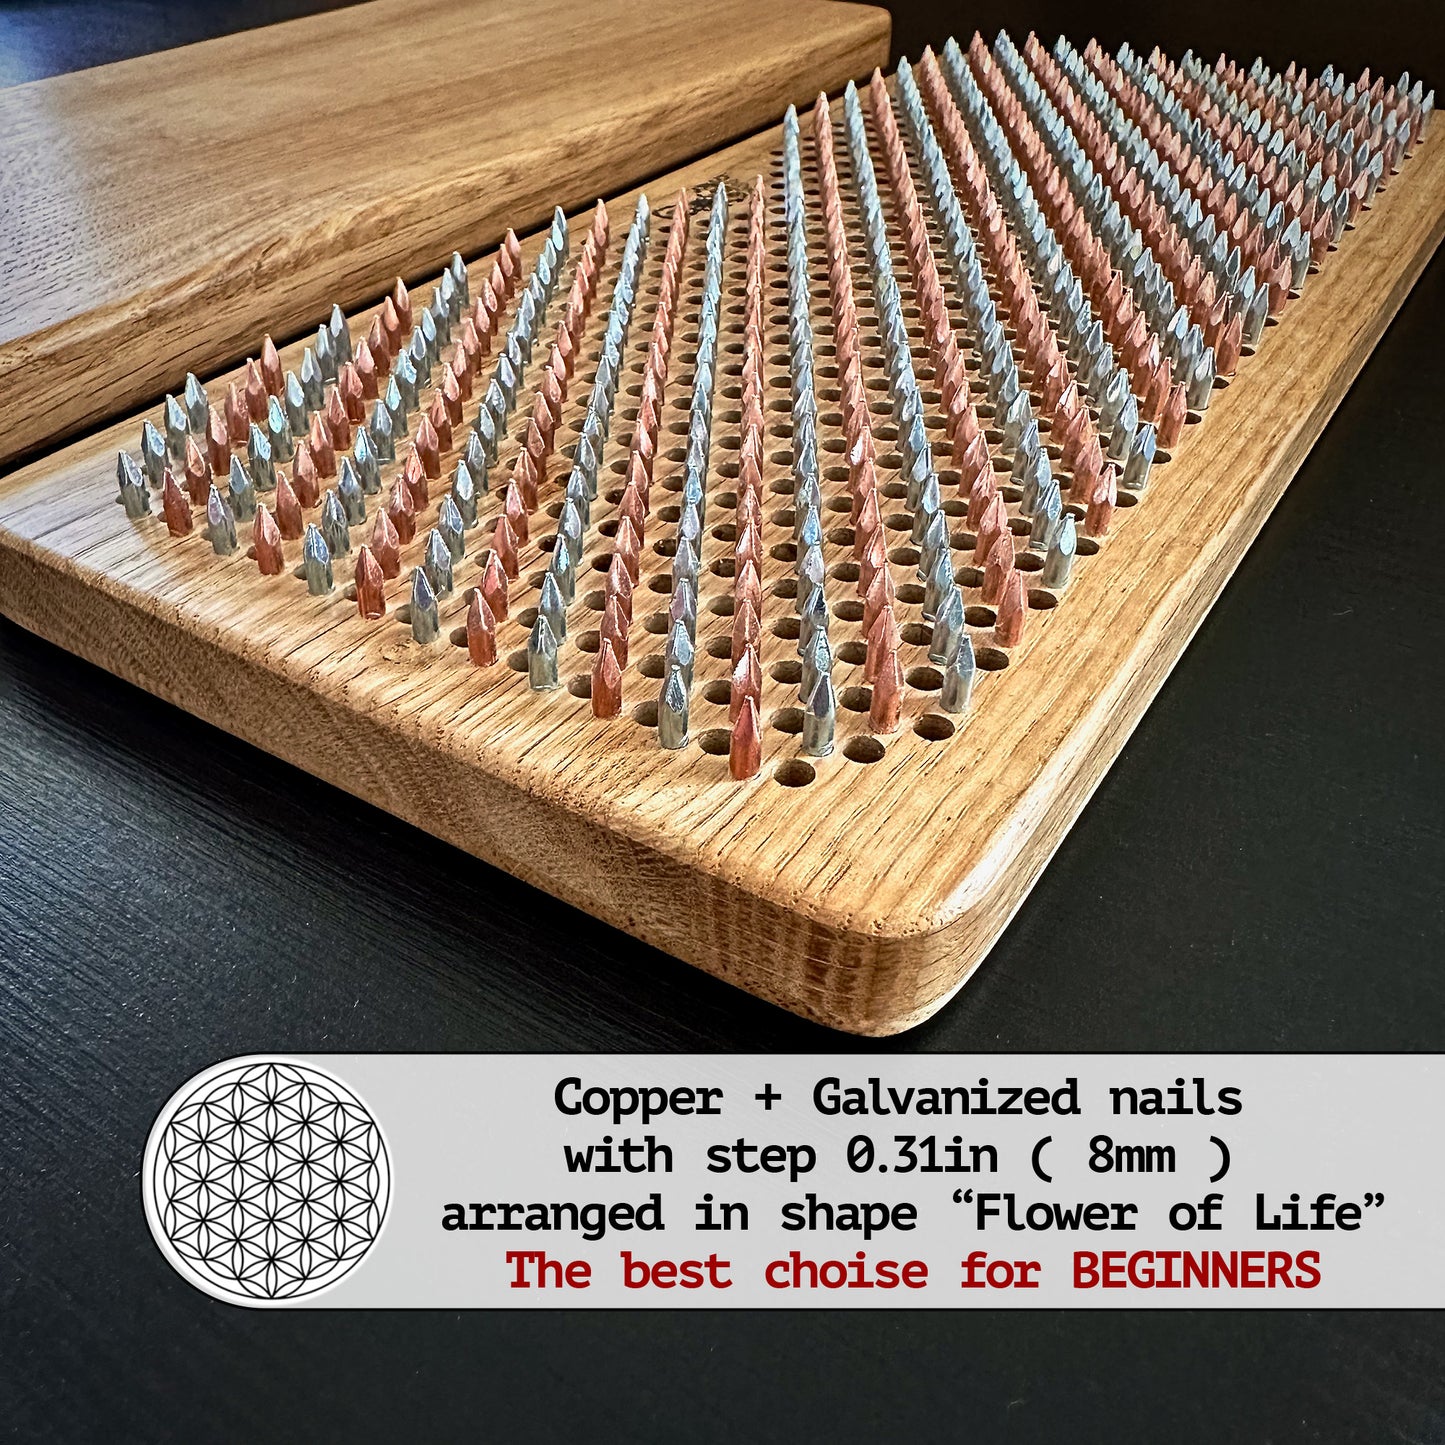 Sadhu board with copper and galvanized nails, step 8mm, Mix Copper